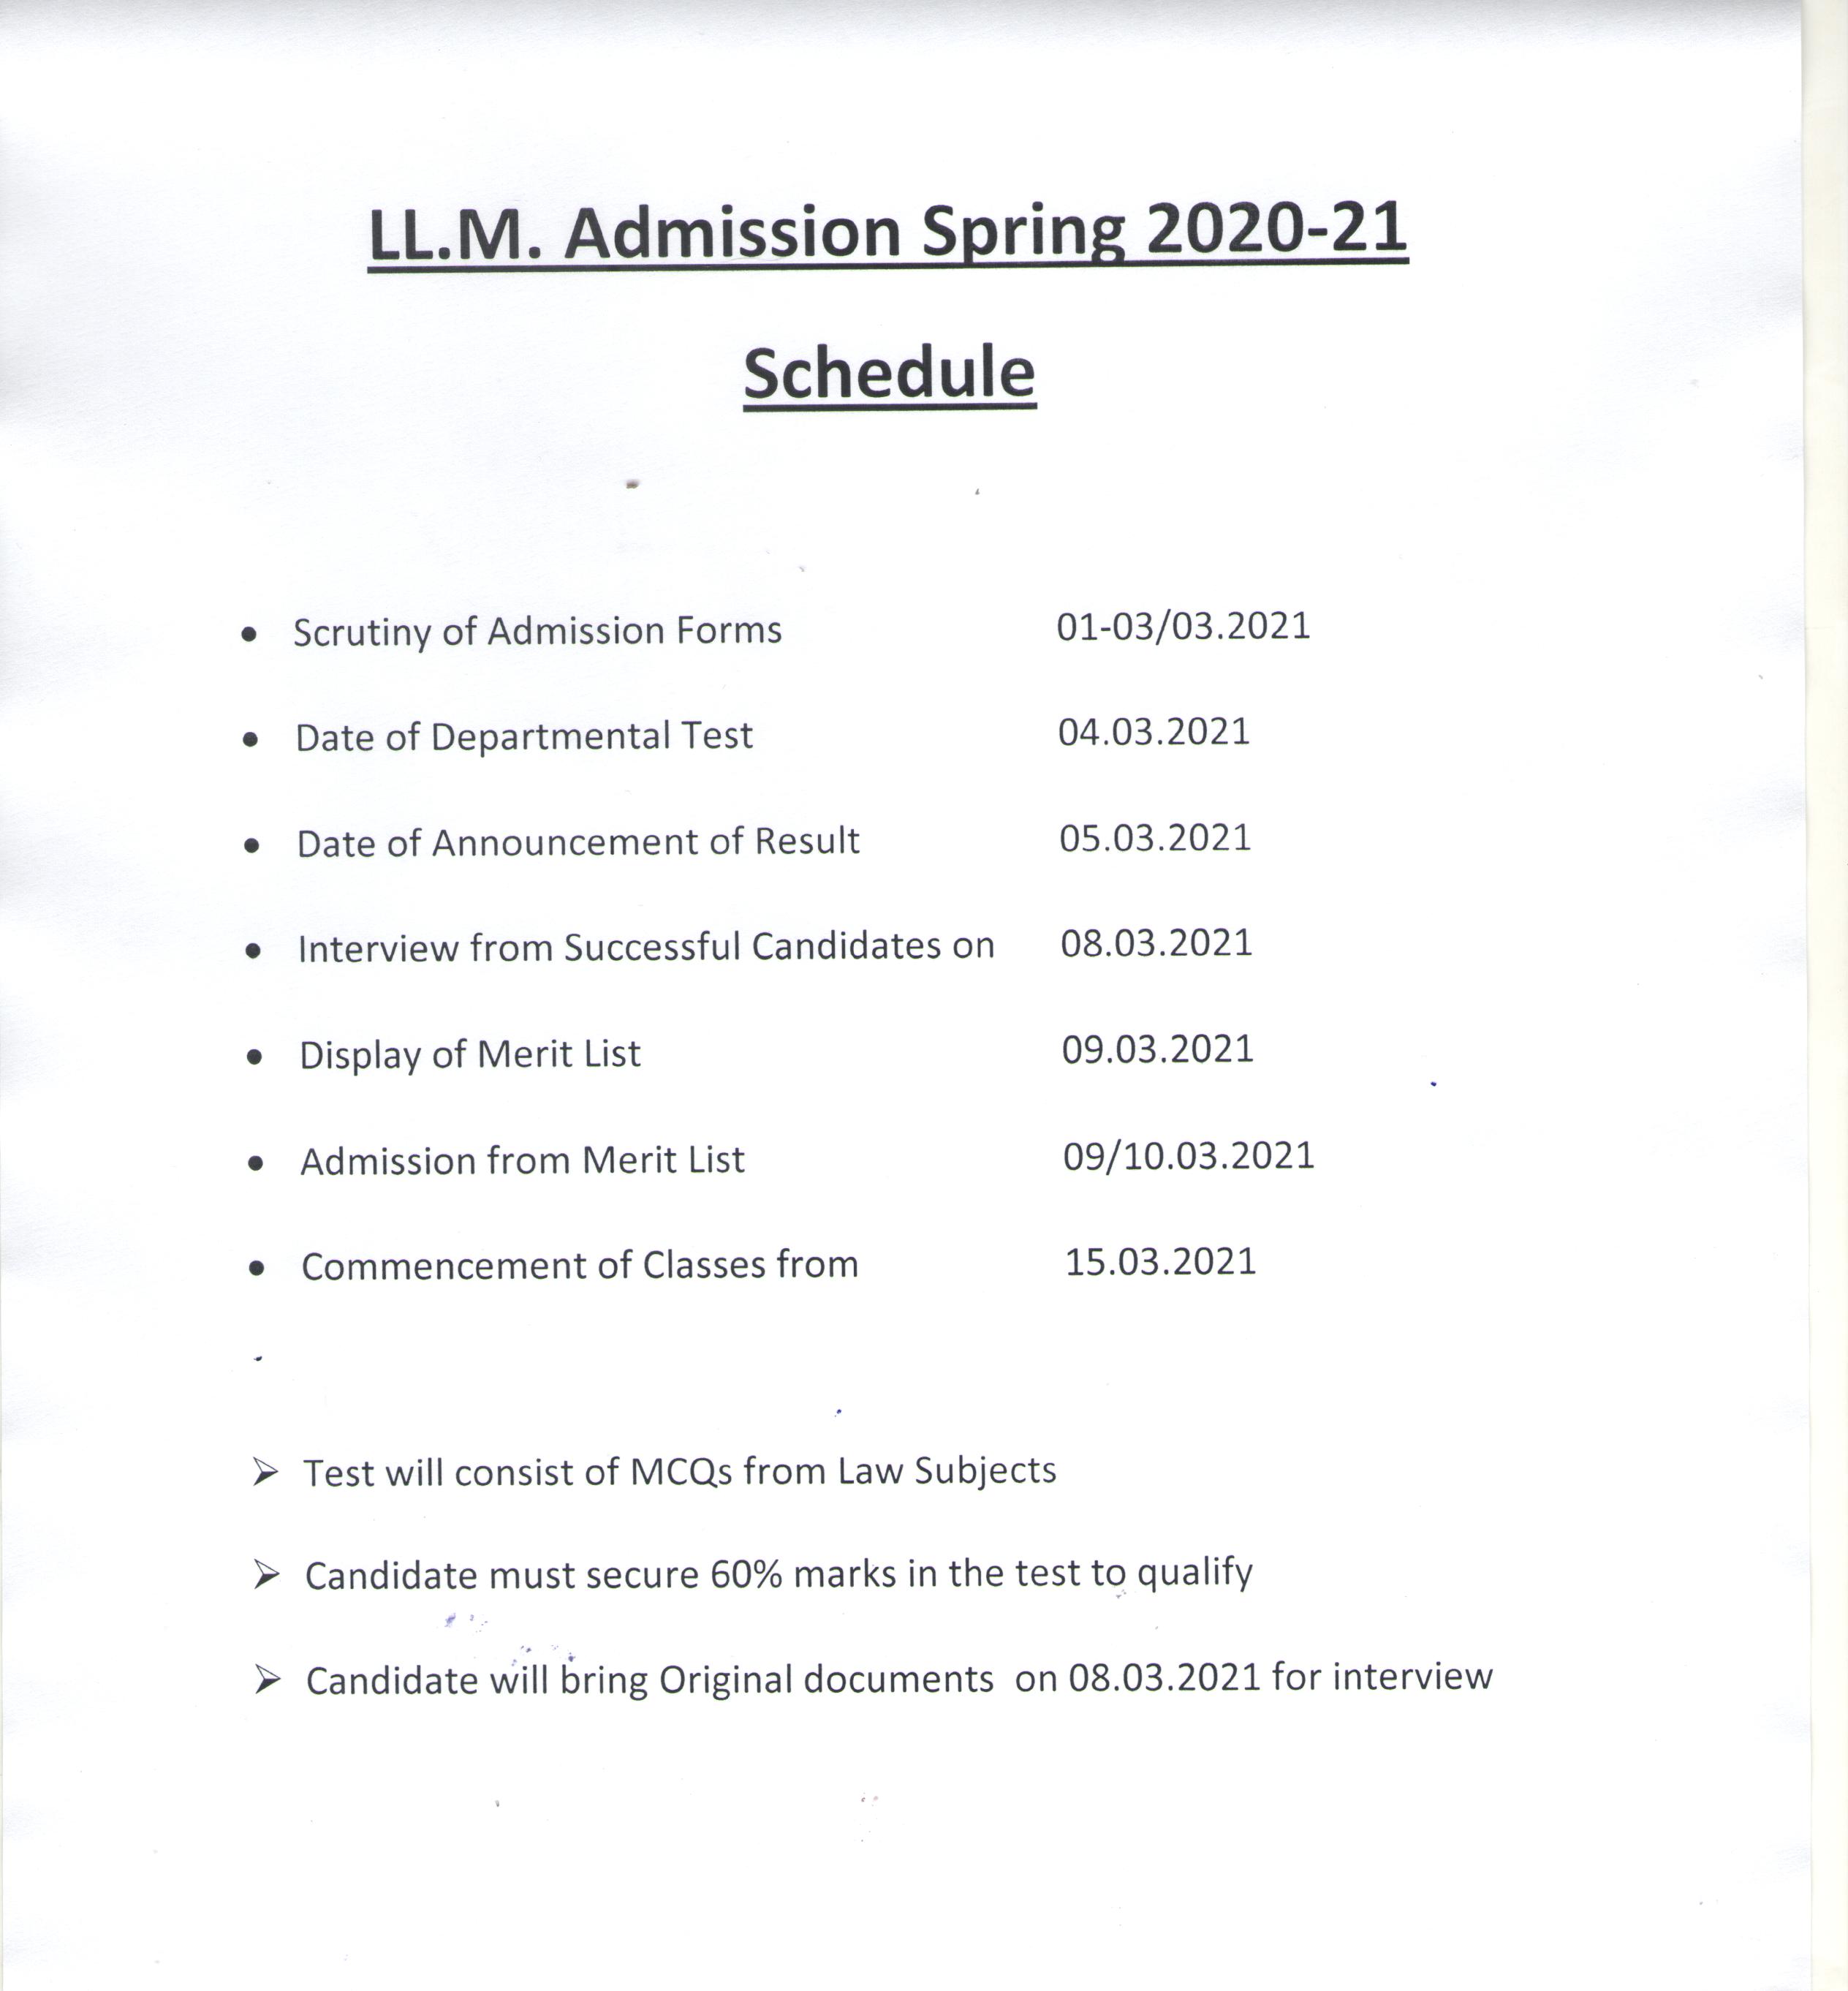 LL.M. Admission Spring 2020-21 Schedule